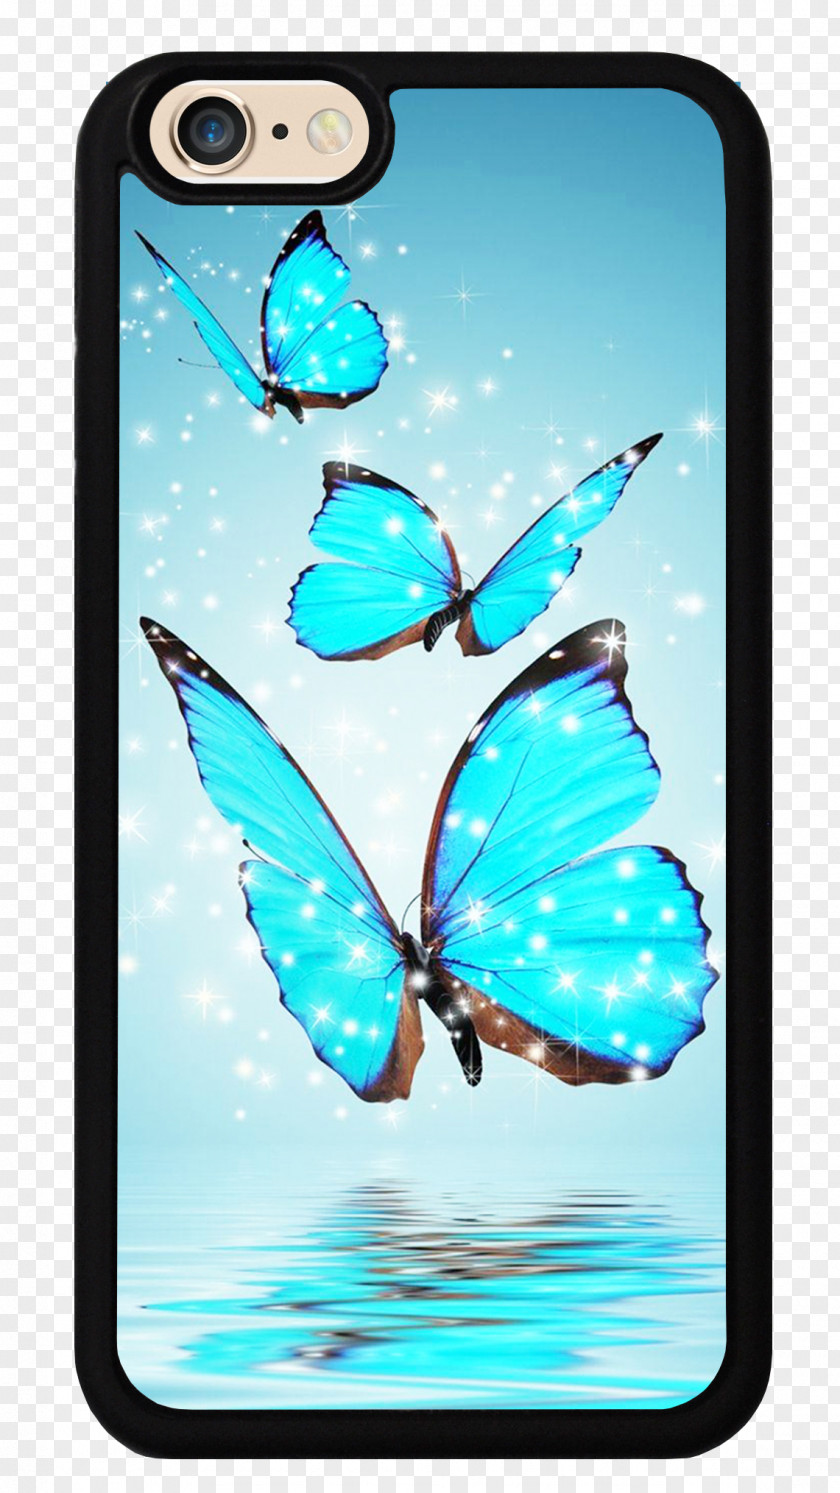 Fly Droid Razr HD Samsung Galaxy IPhone Desktop Wallpaper Android PNG